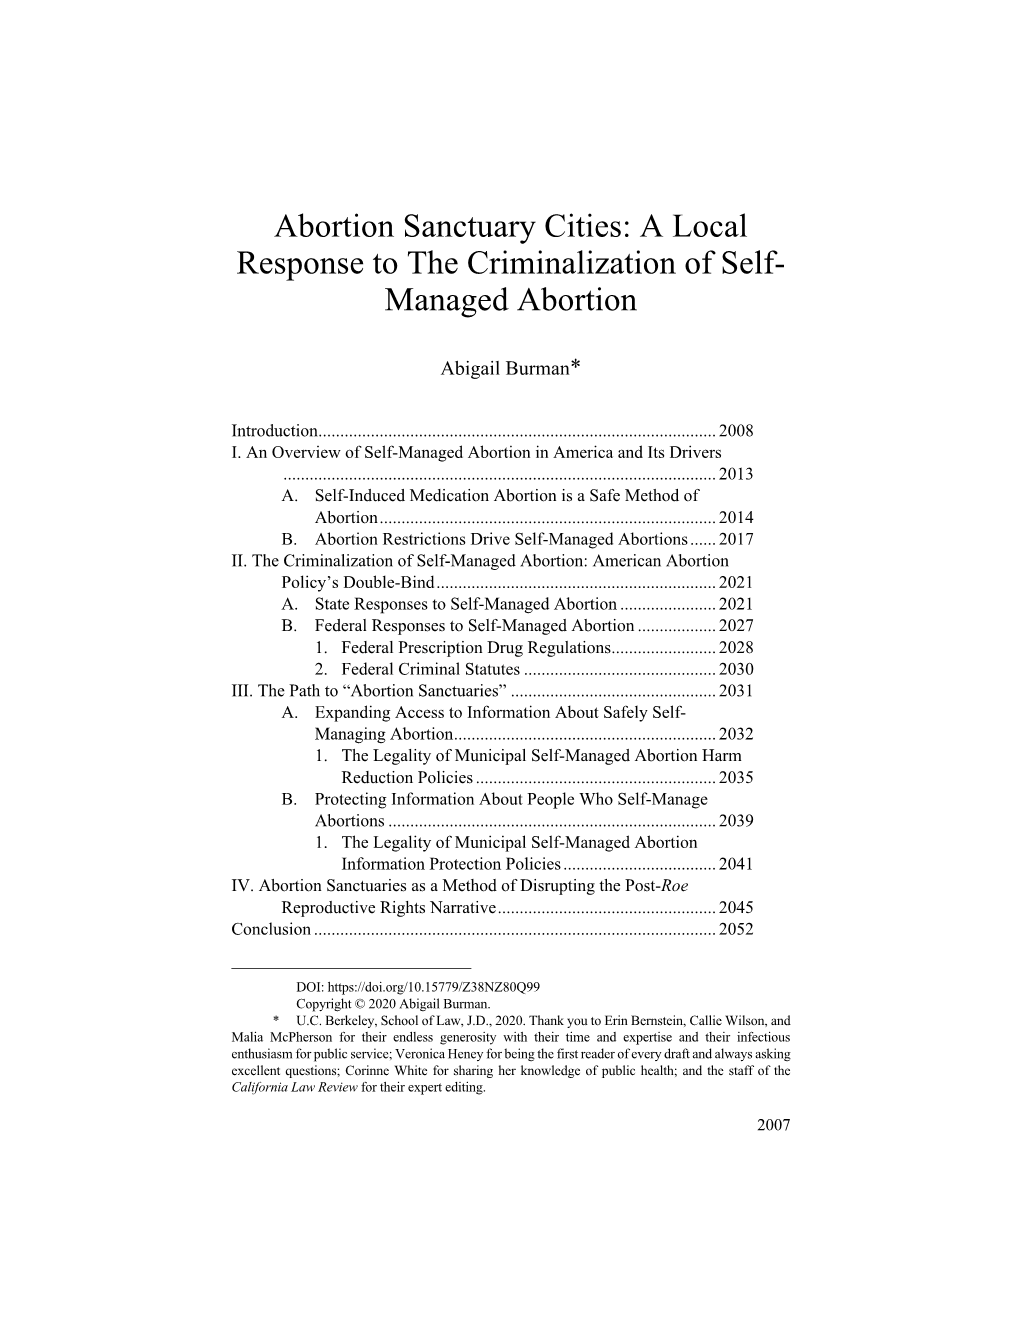 Abortion Sanctuary Cities: a Local Response to the Criminalization of Self- Managed Abortion